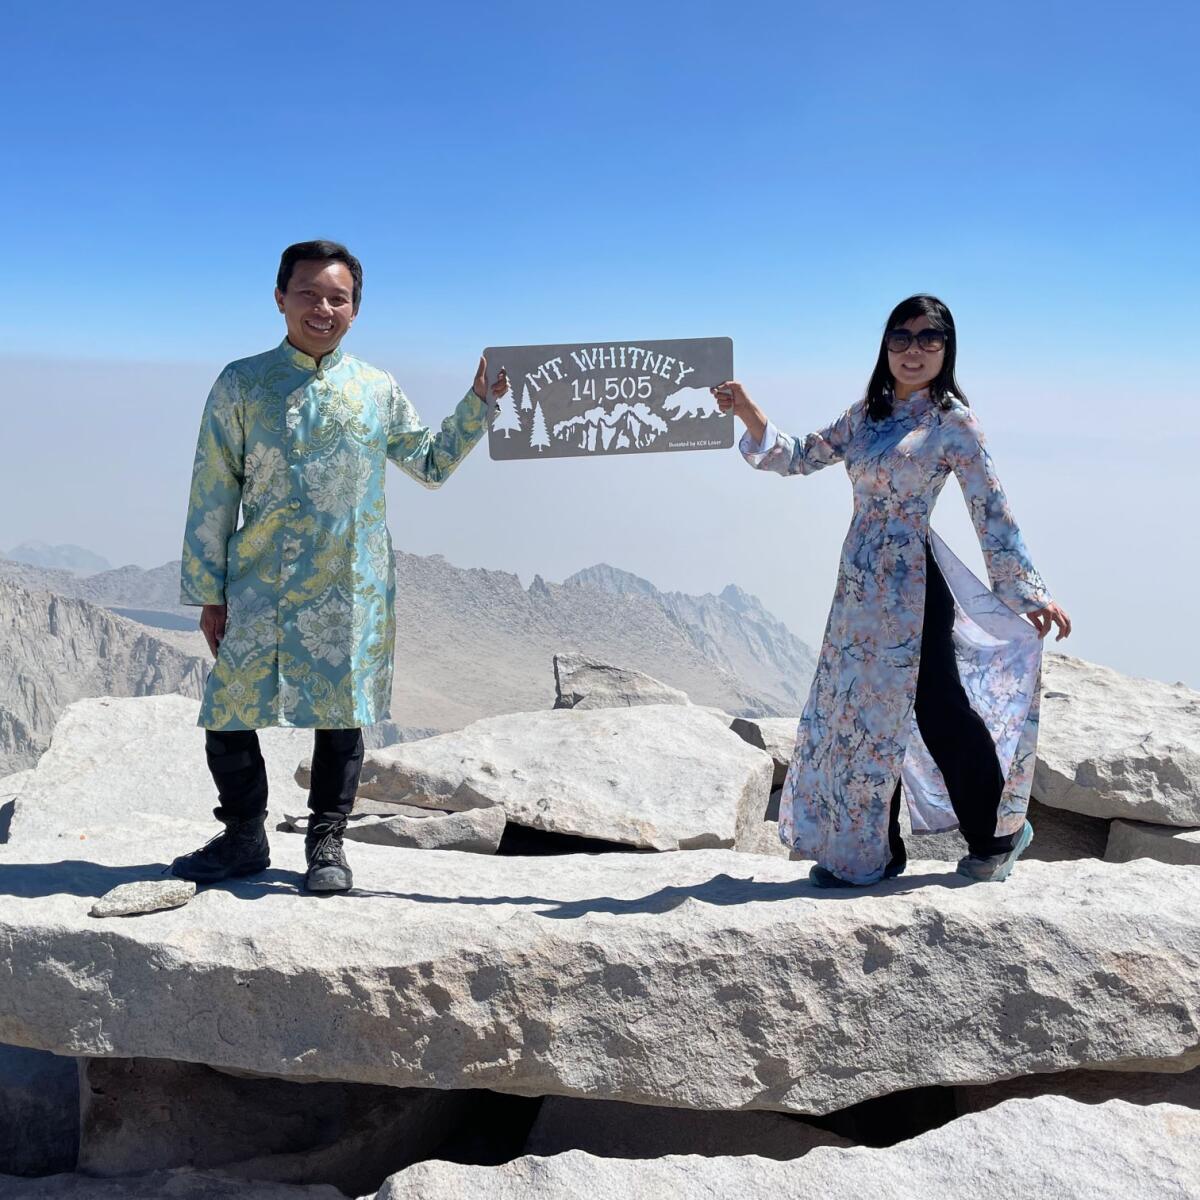  A man and woman, in traditional Vietnamese dress, hold a sign on Mt. Whitney.